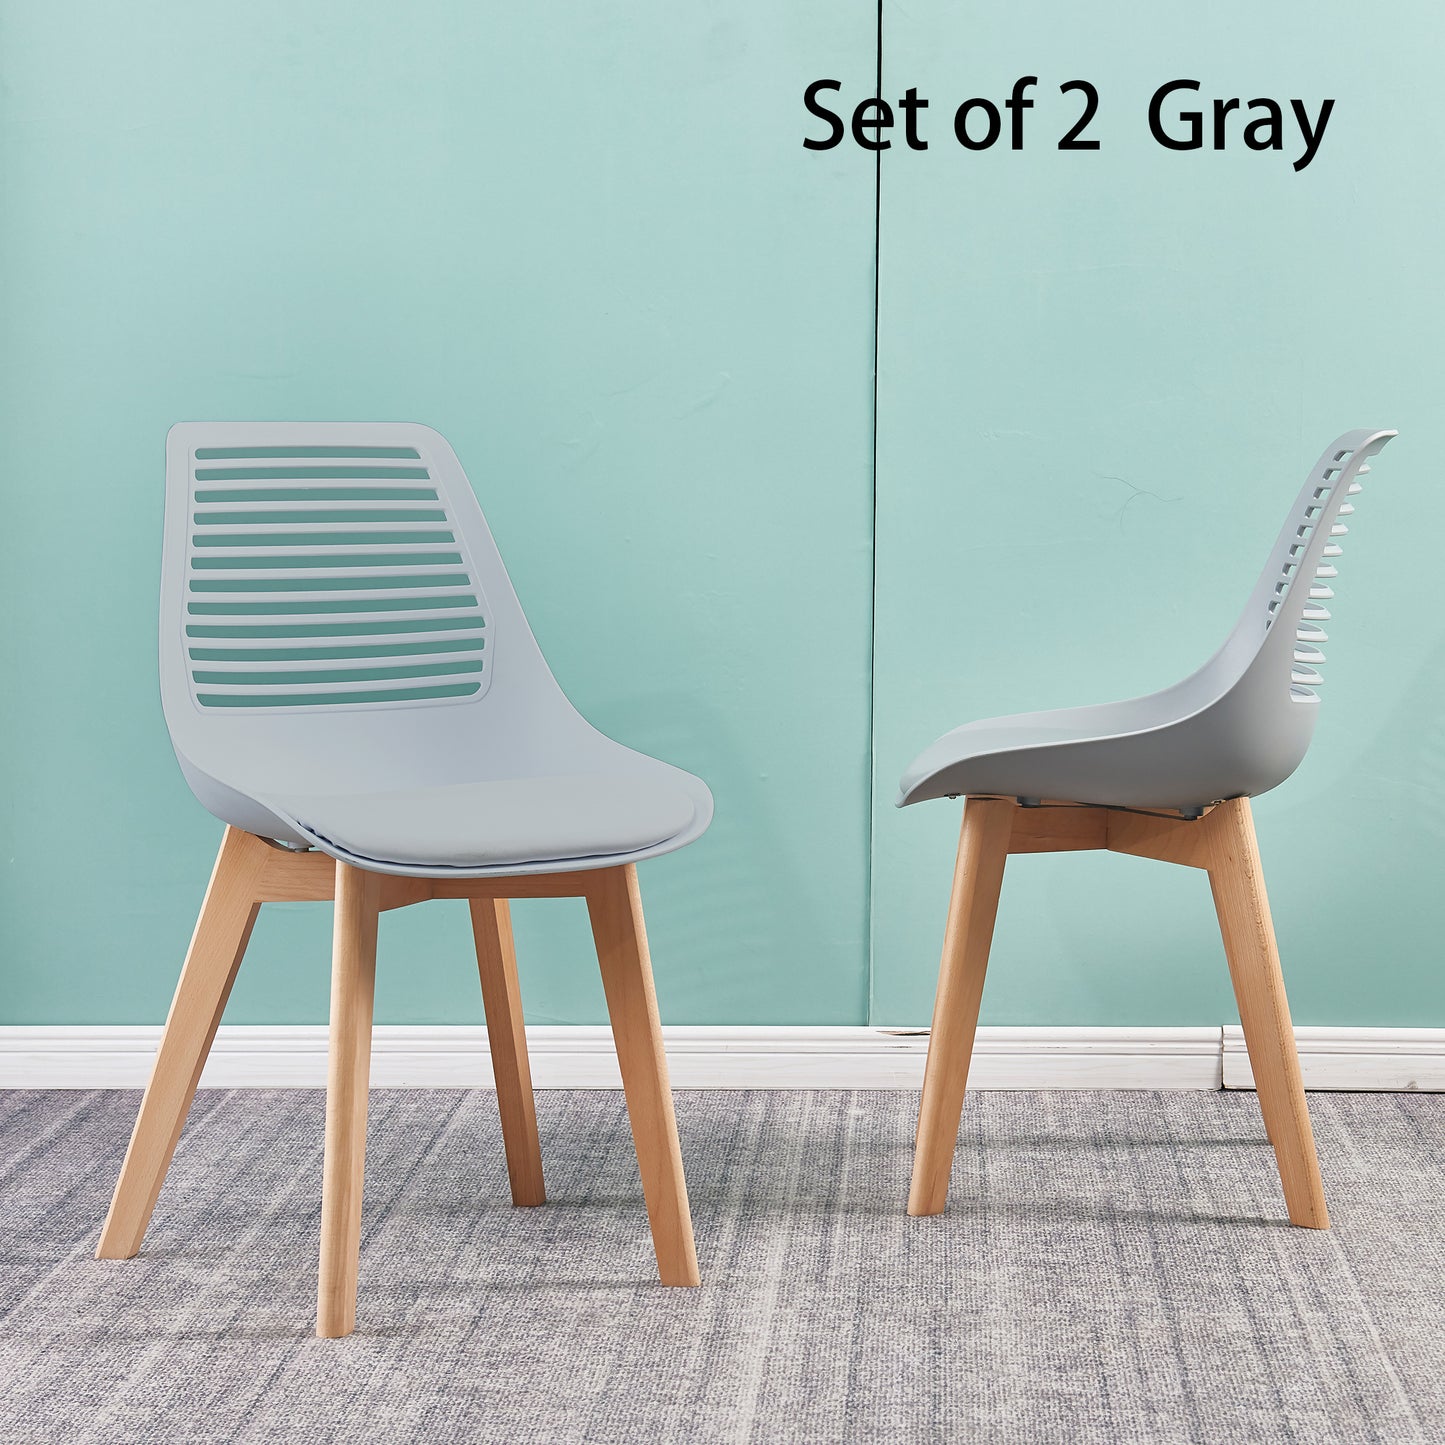 Plastic chair for living room, dining chair with wood leg（set of 2 Gray color）